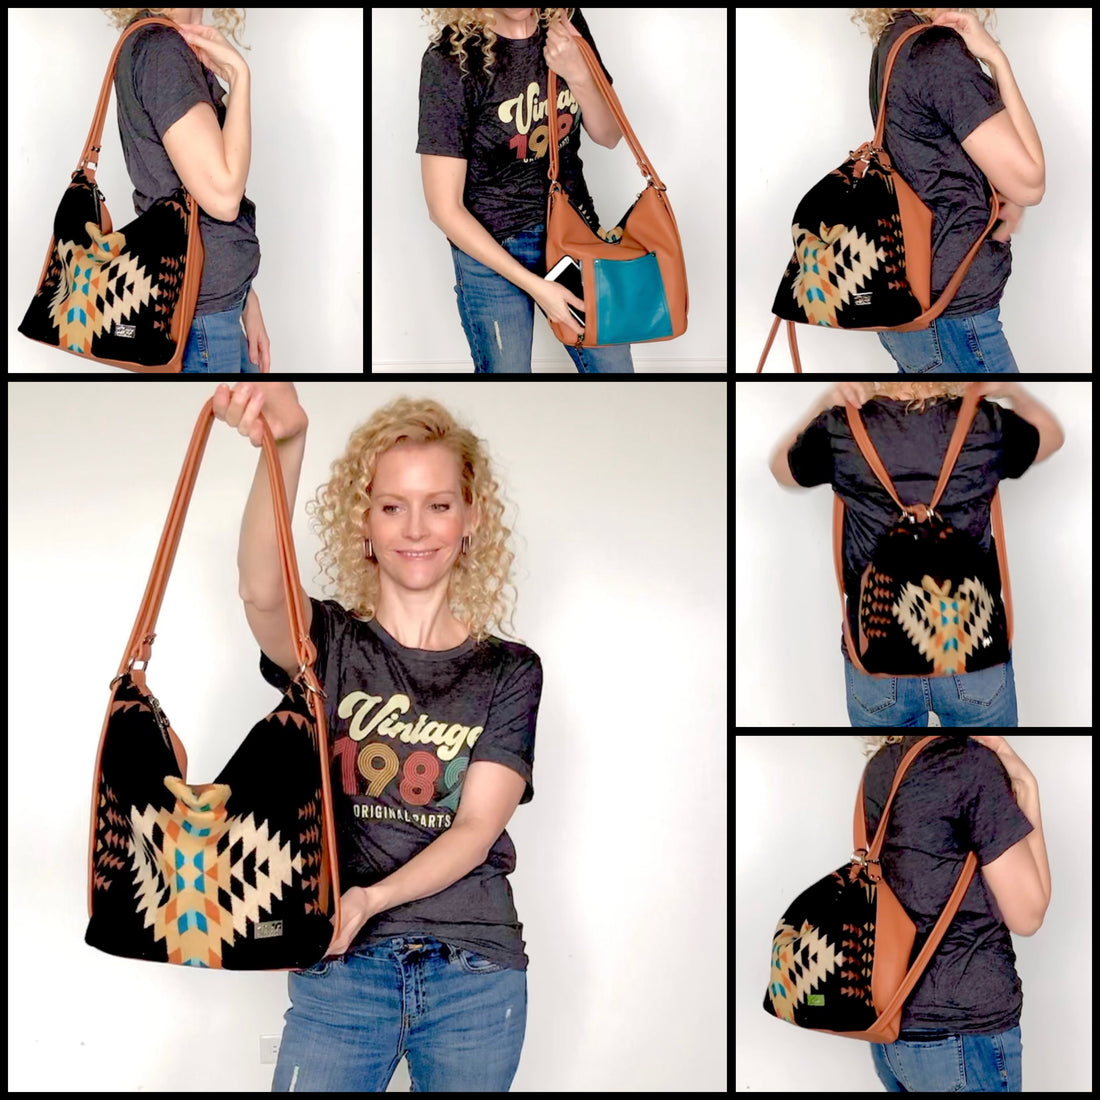 Krystal Convertible Bag PDF sewing pattern (includes SVGs and